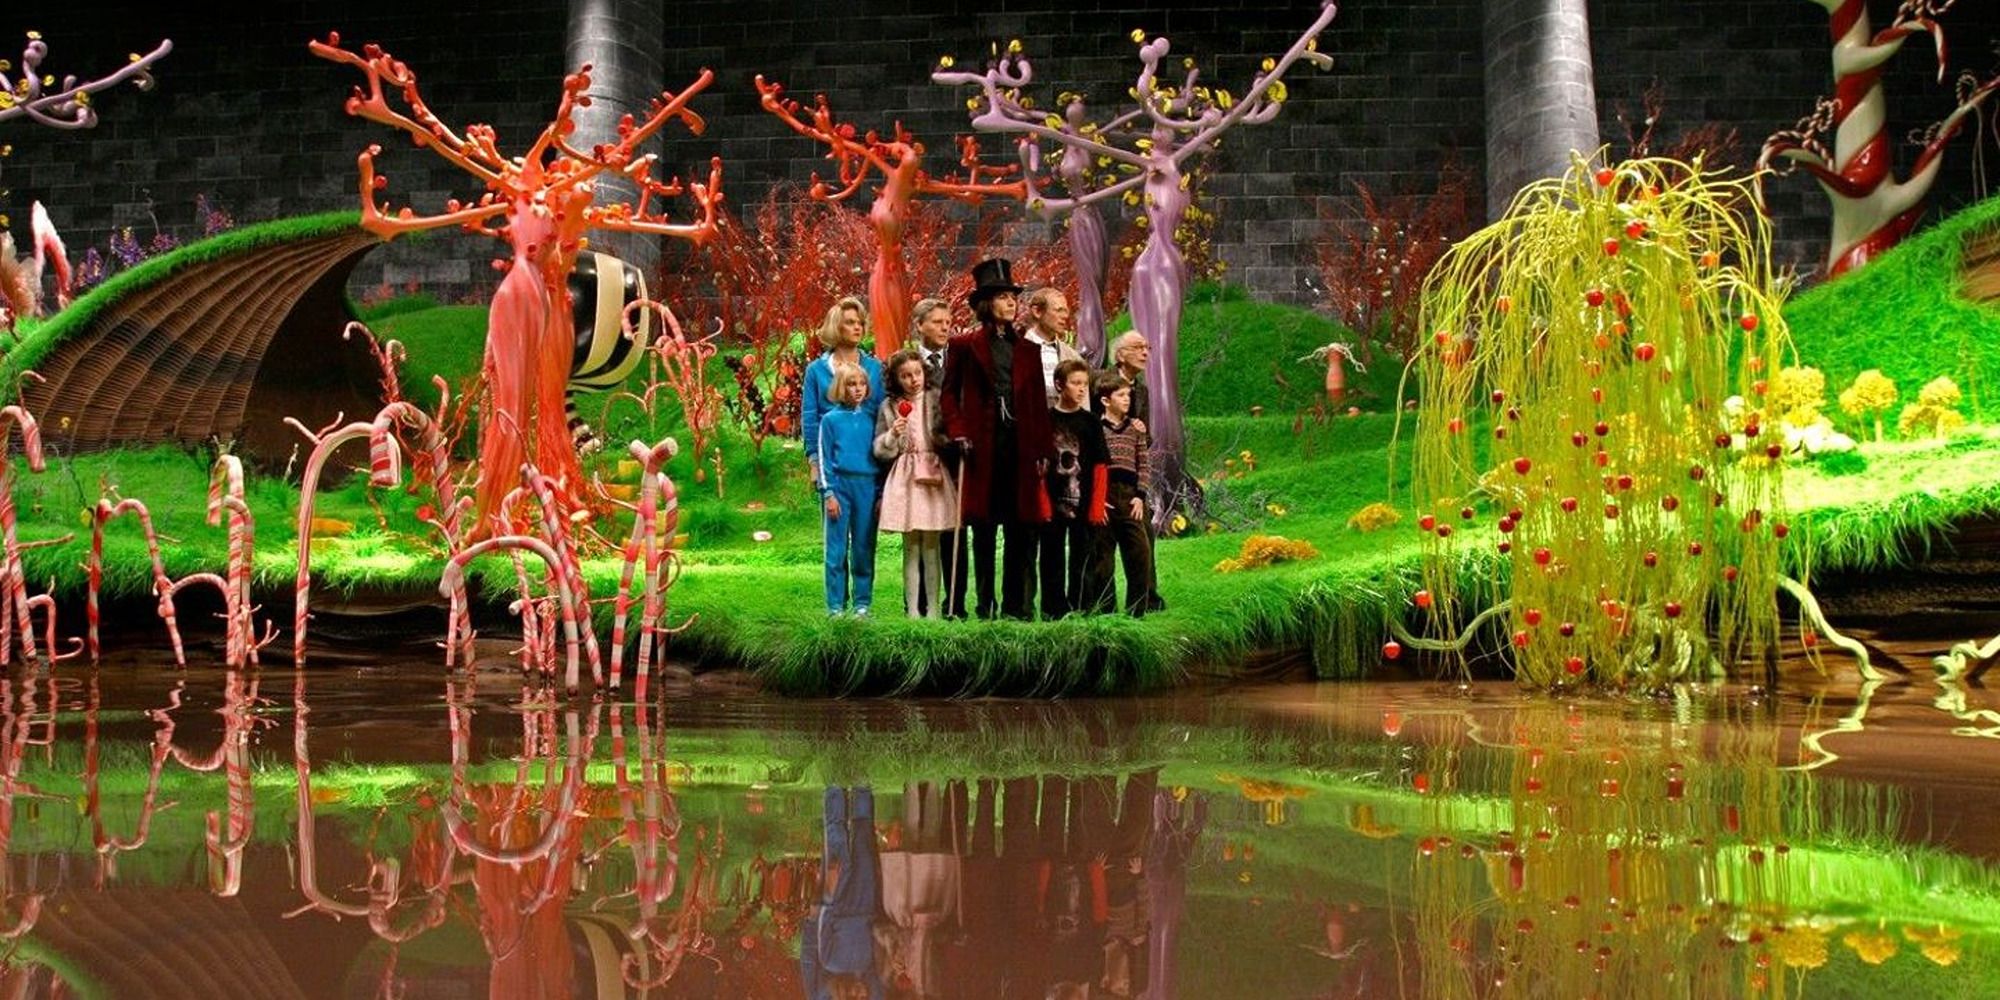 Wonka and company in front of the chocolate river from Charlie and the Chocolate Factory